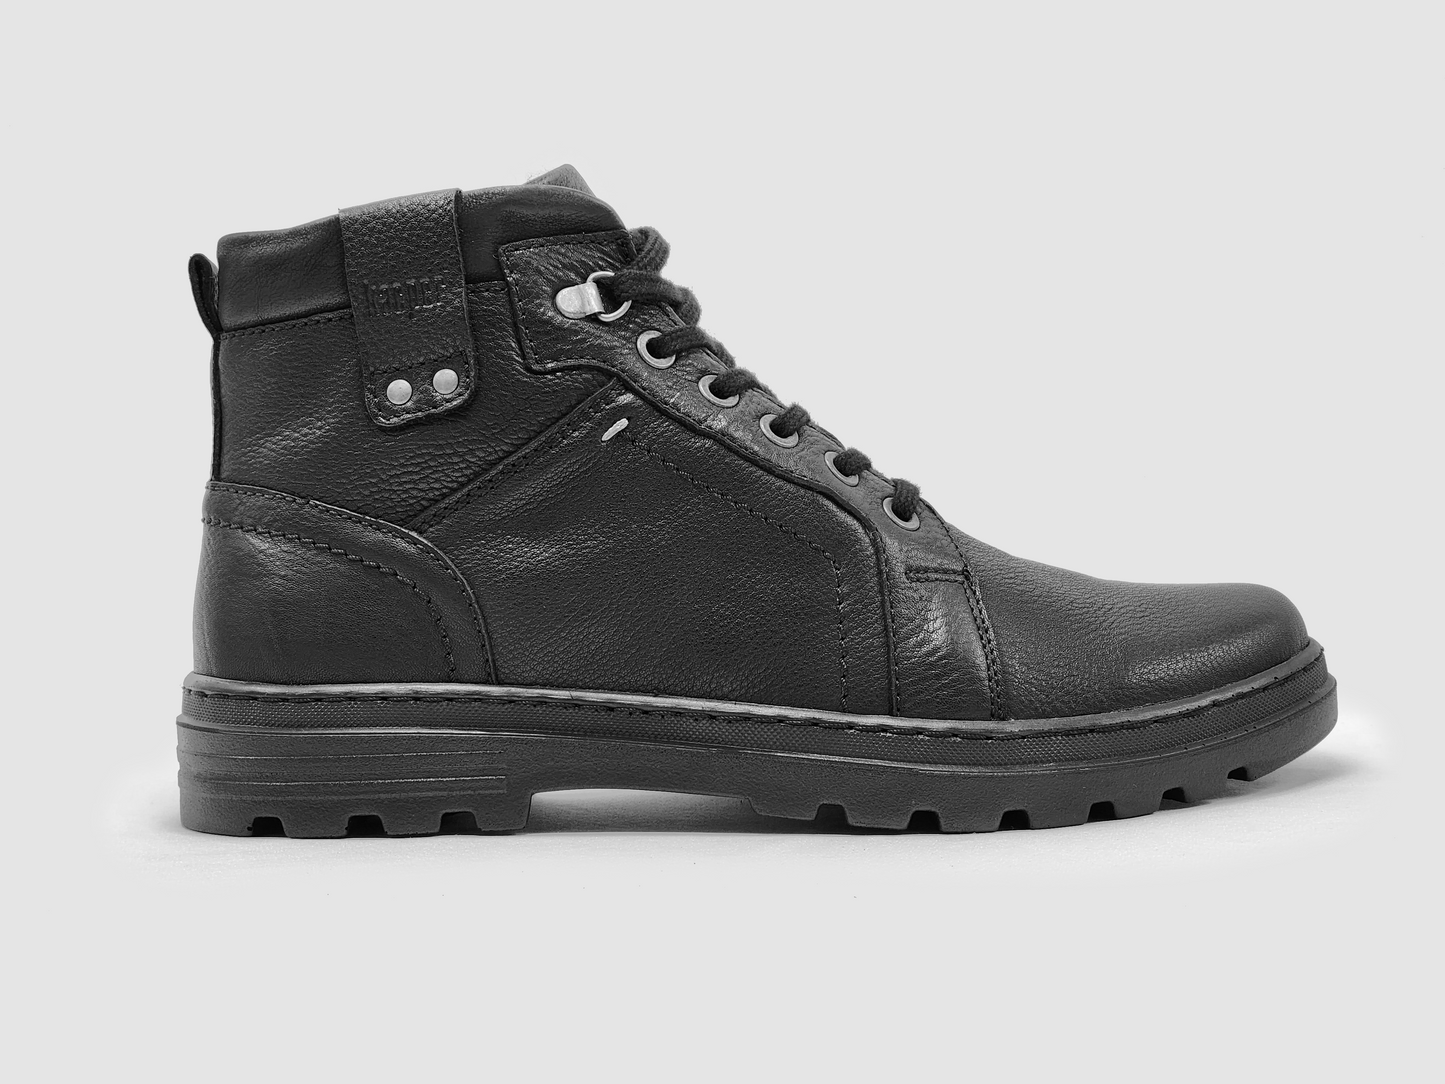 Men's Utility Wool-Lined Leather Boots - Black - Kacper Global Shoes 